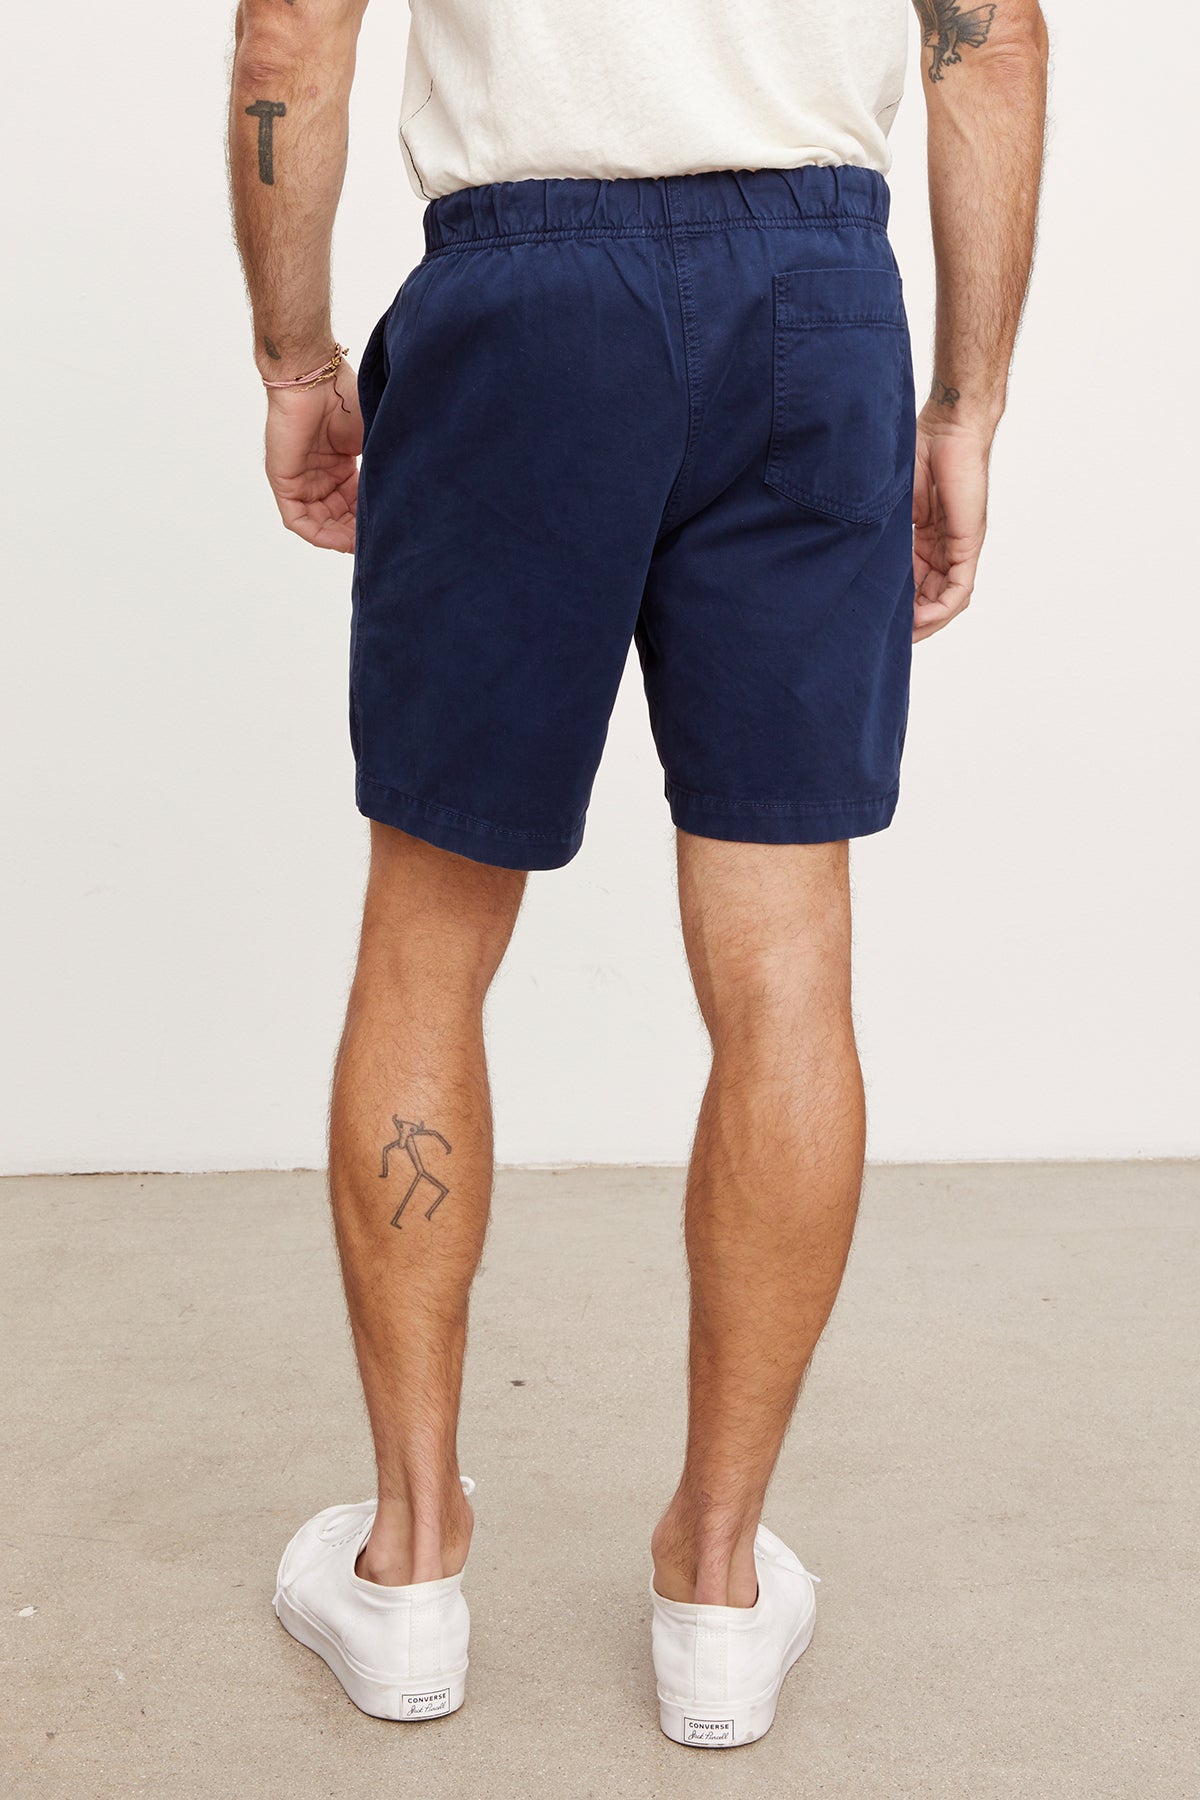   A man viewed from behind wearing navy blue cotton twill Velvet by Graham & Spencer Fielder shorts and white sneakers, standing with hands in pockets; visible tattoos on his legs. 